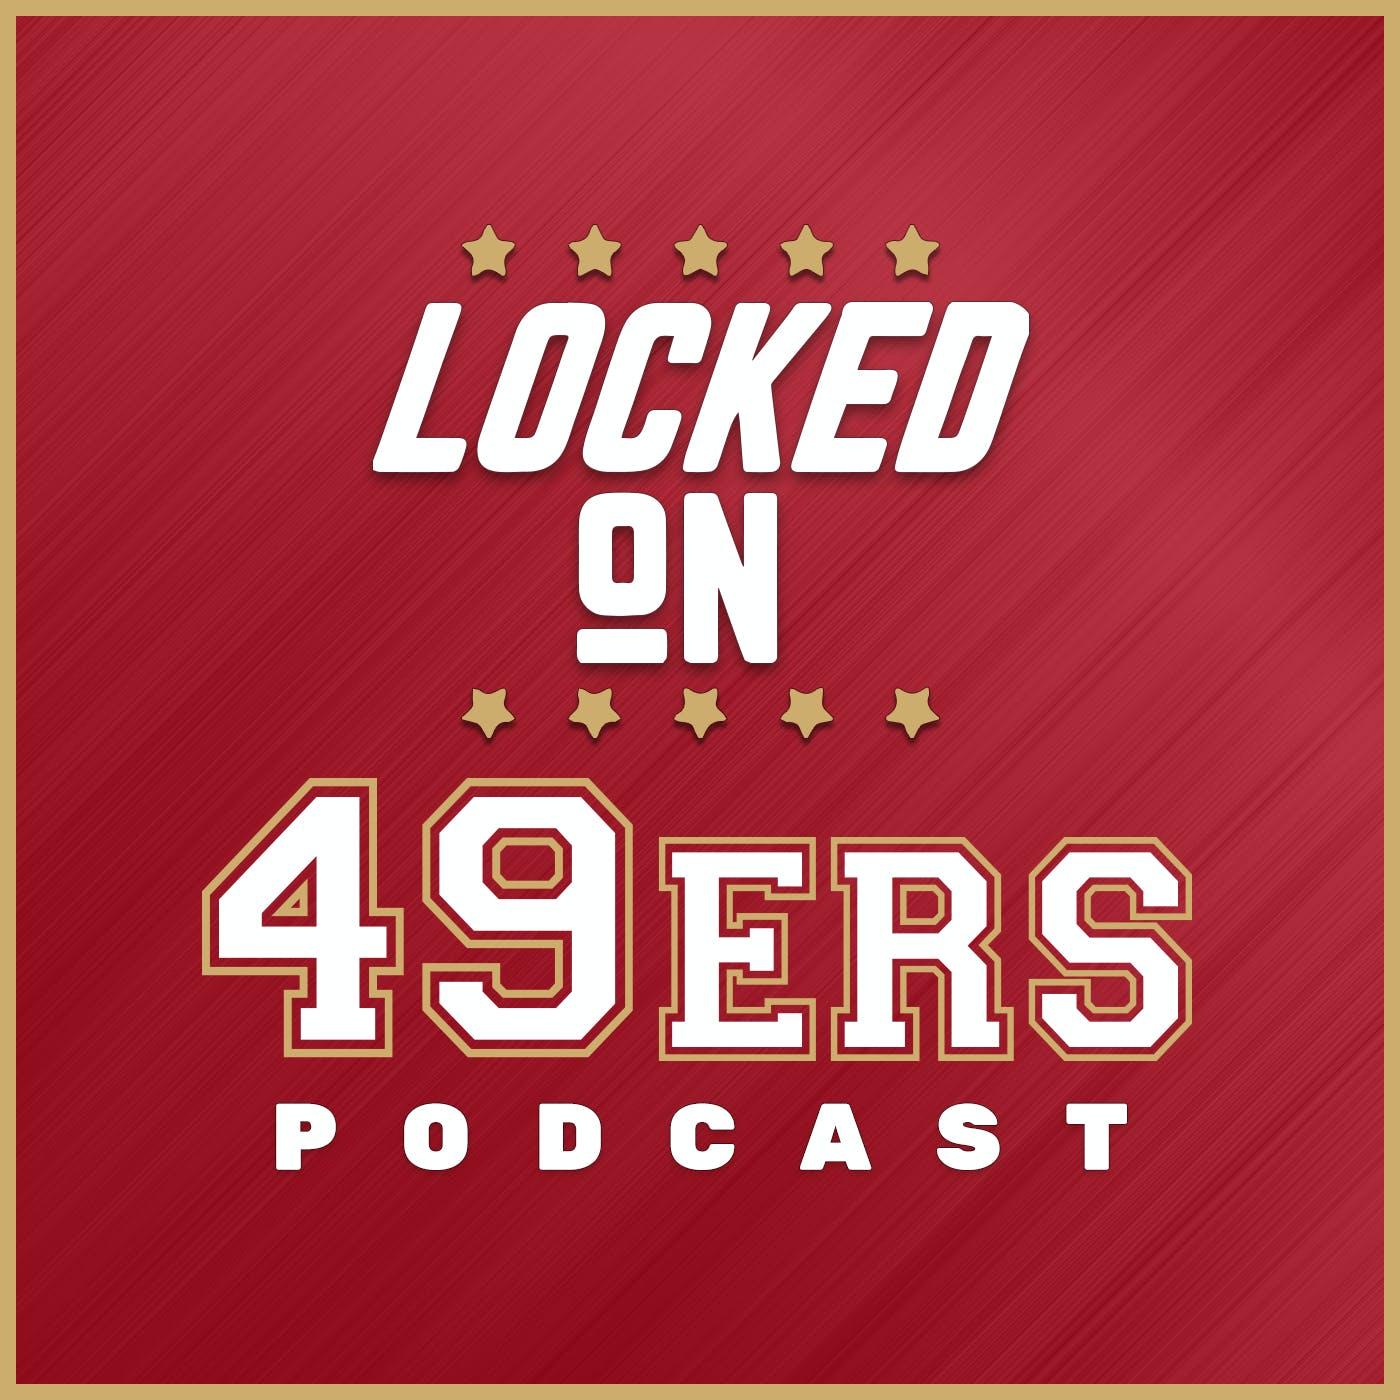 Show poster of Locked On 49ers - Daily Podcast On The San Francisco 49ers